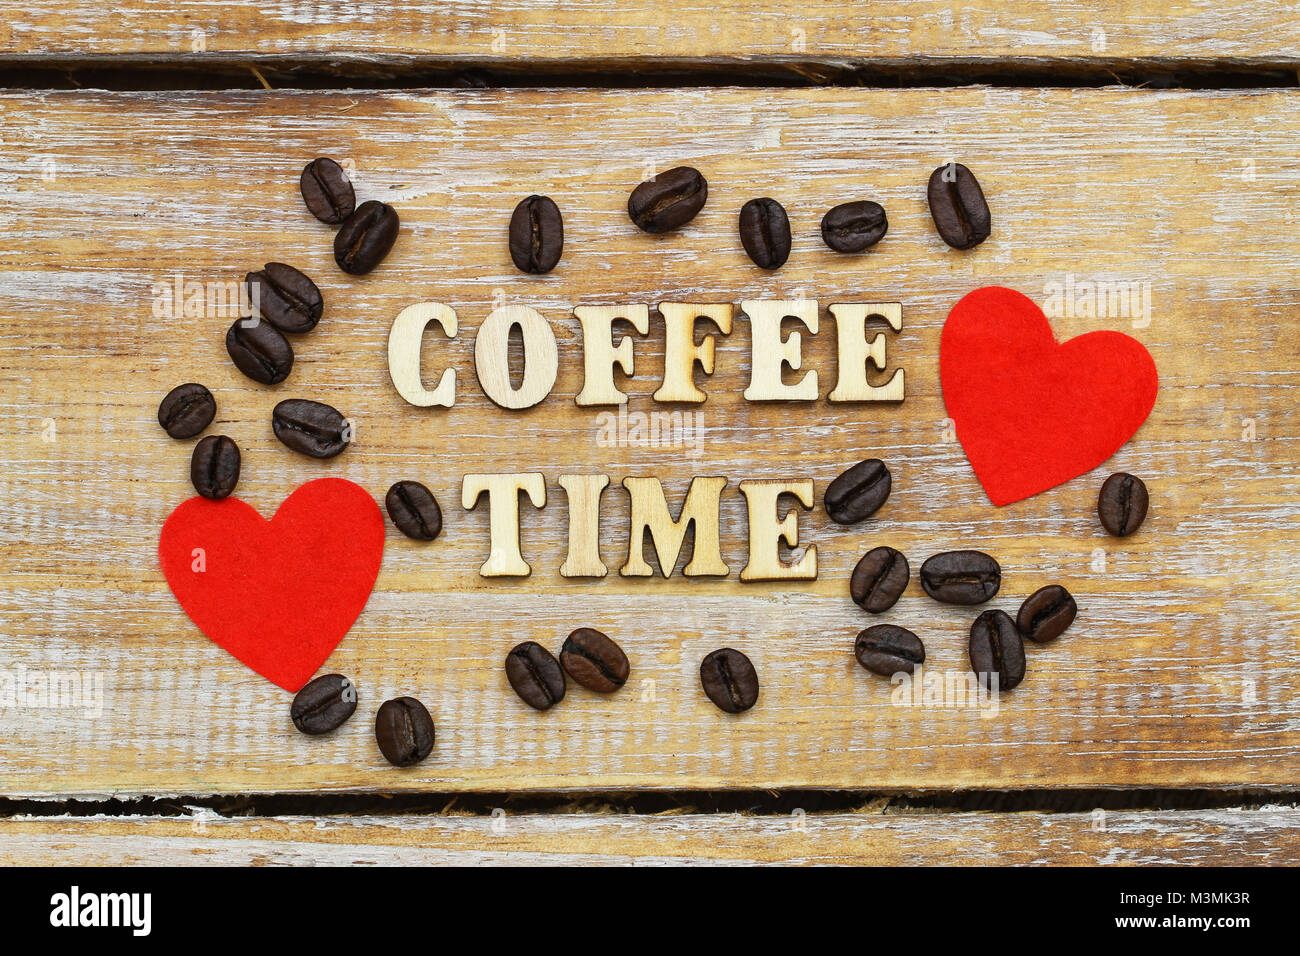 Coffee time written with wooden letters on rustic surface, two red hearts and coffee beans Stock Photo